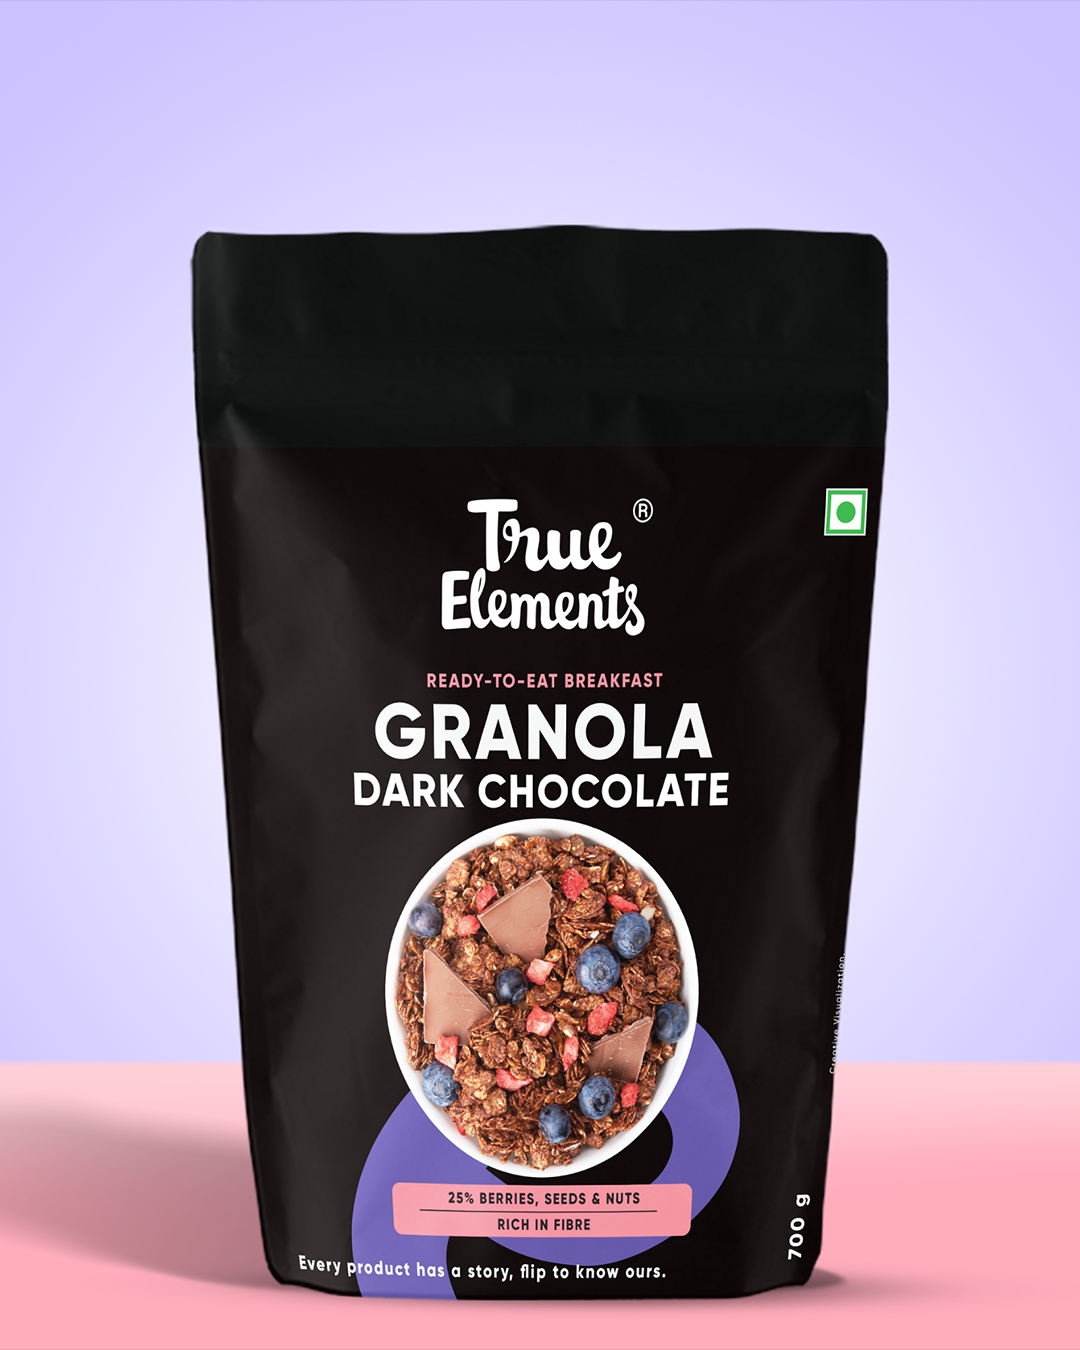 True Elements Crunchy Chocolate Granola With 100% Dark Chocolate Almonds And Cranberries Image